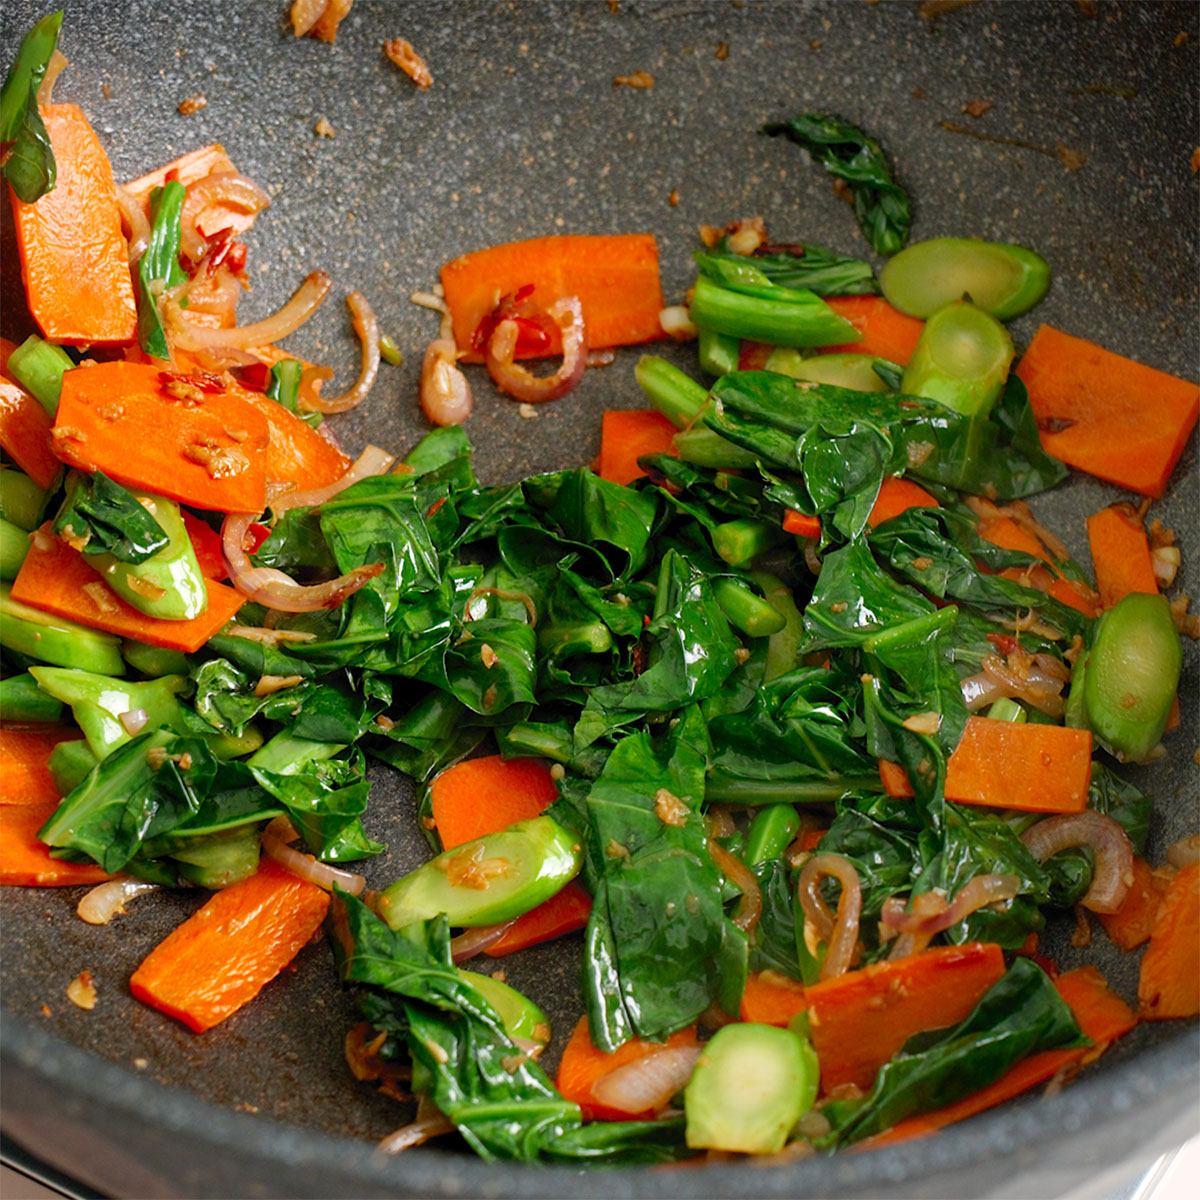 Vegetables being cooked in a large wok.